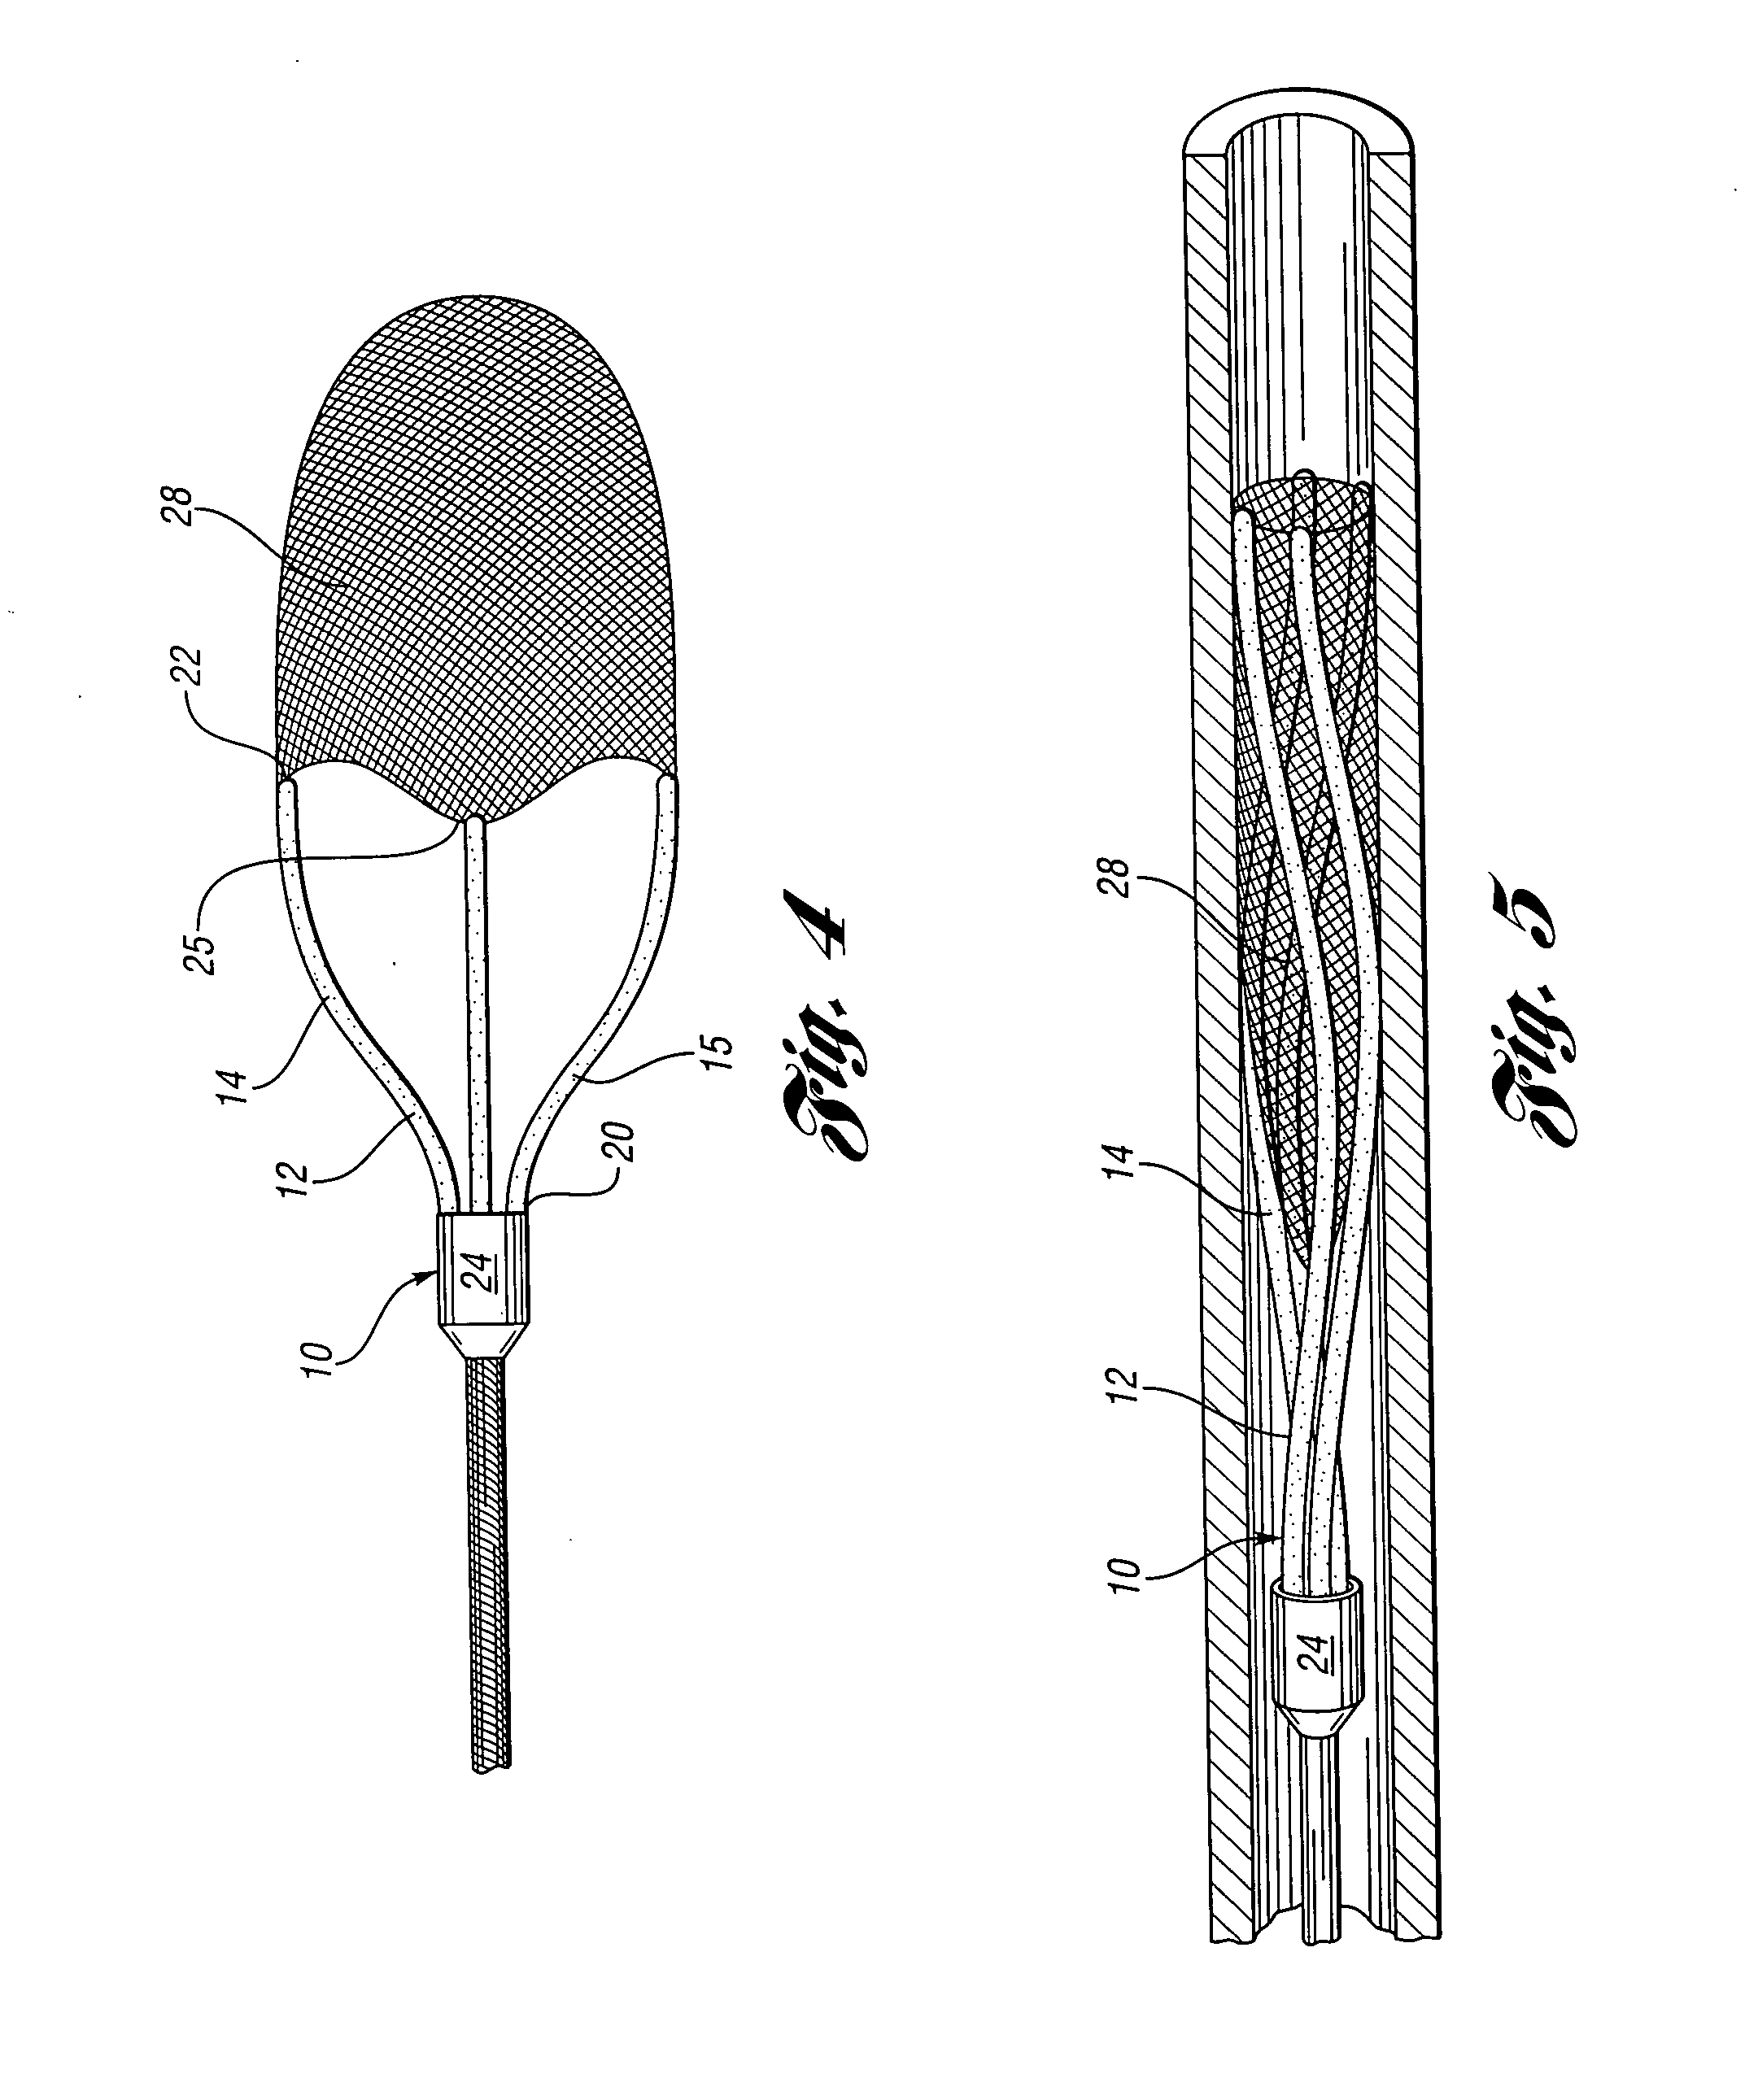 Embolic protection device having a filter